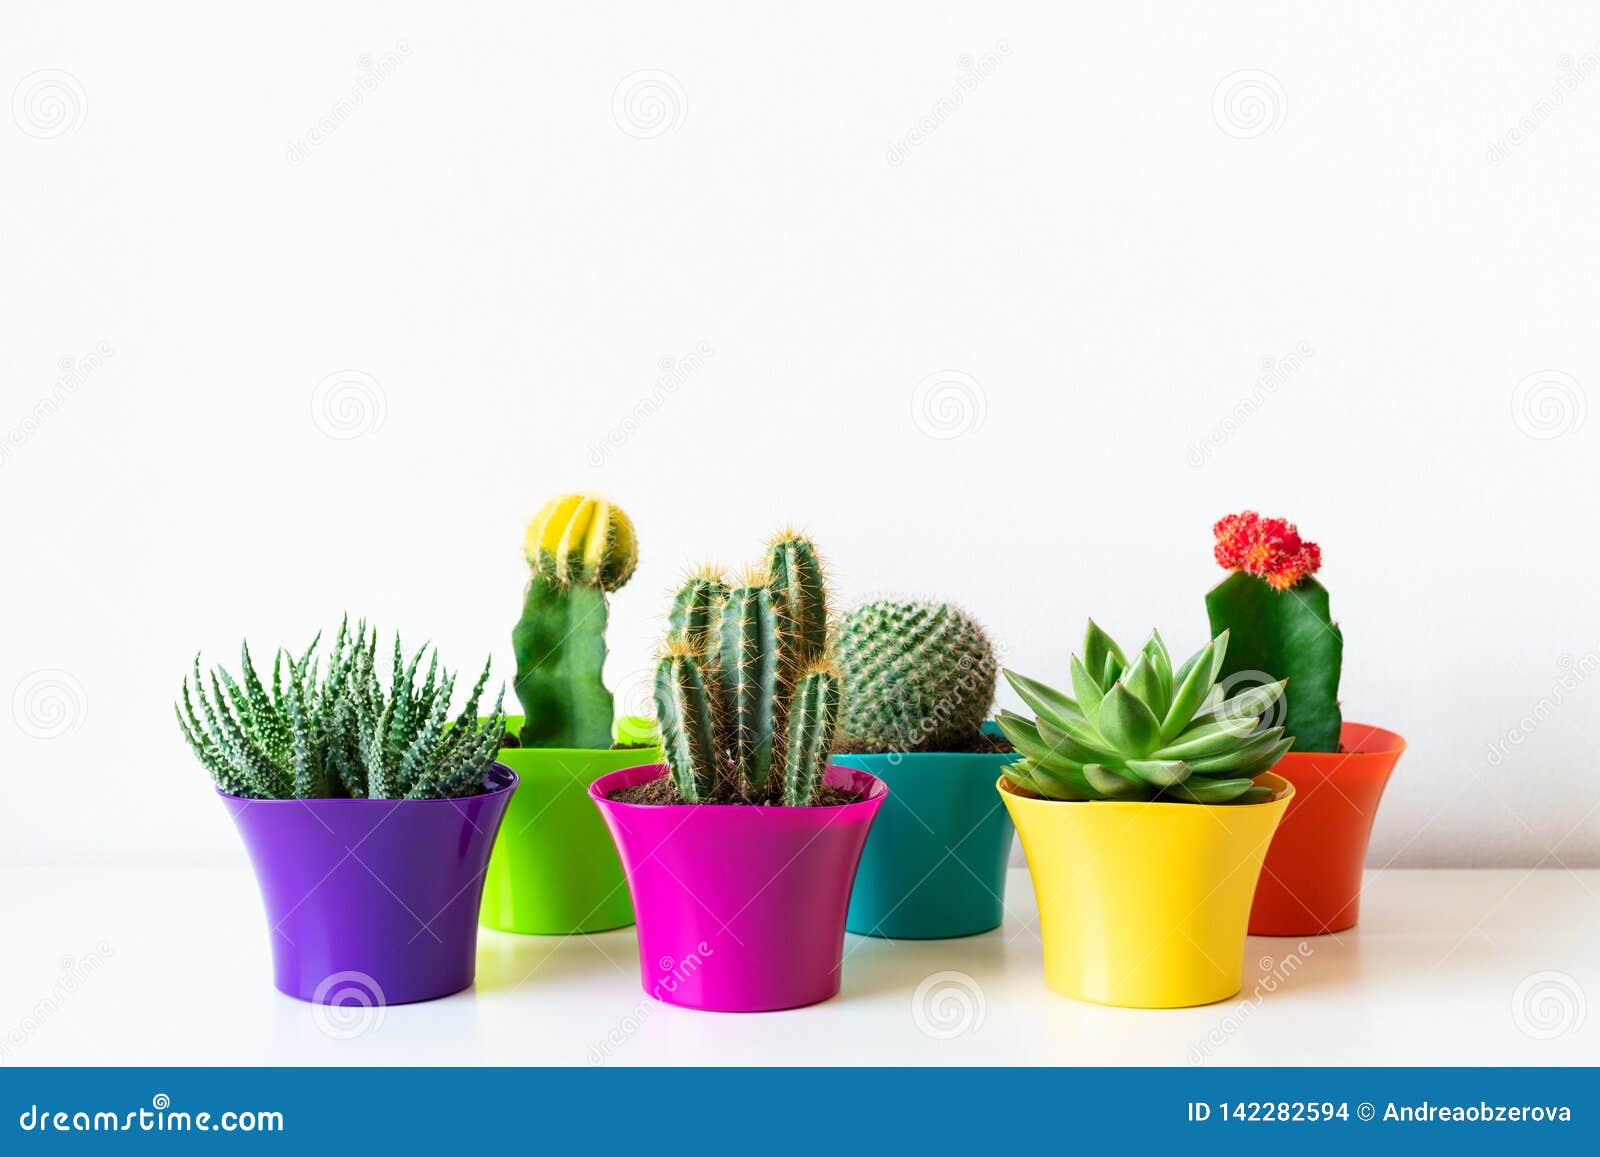 various flowering cactus and succulent plants in bright colorful flower pots against white wall. house plants on white shelf.